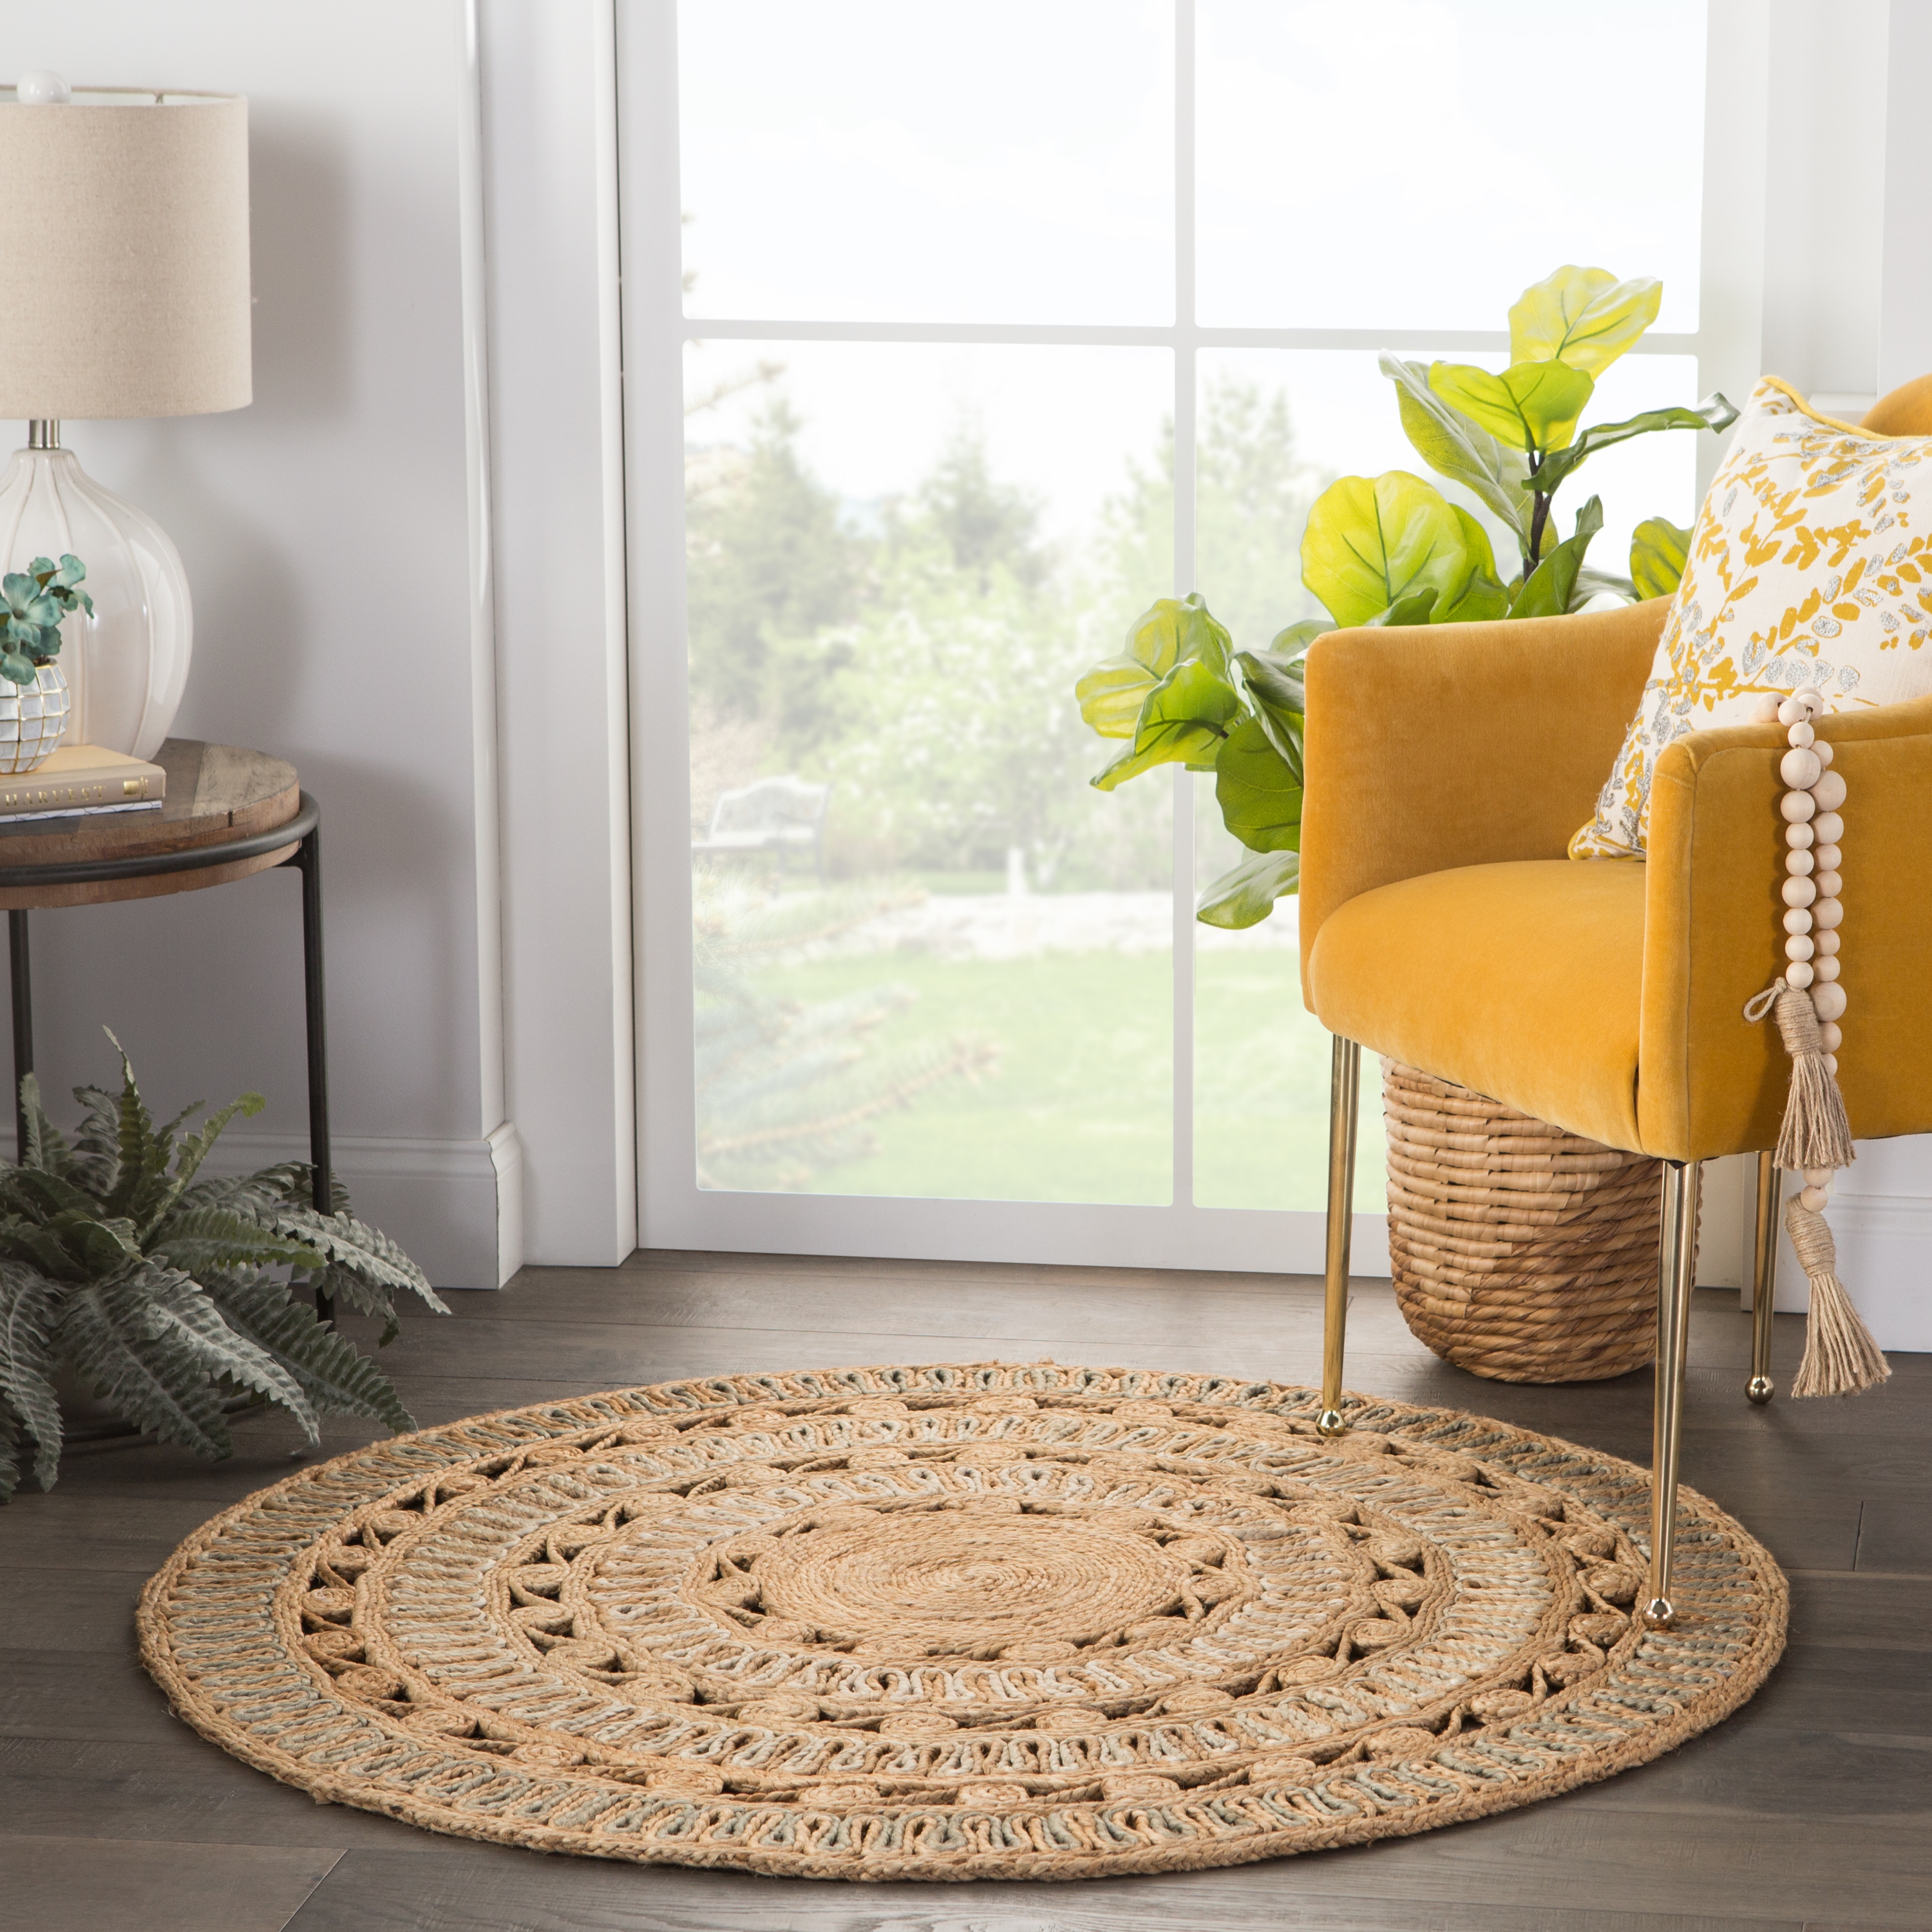 Peony Natural Dots Beige/ Gray Round Area Rug (4'X4') - Image 2